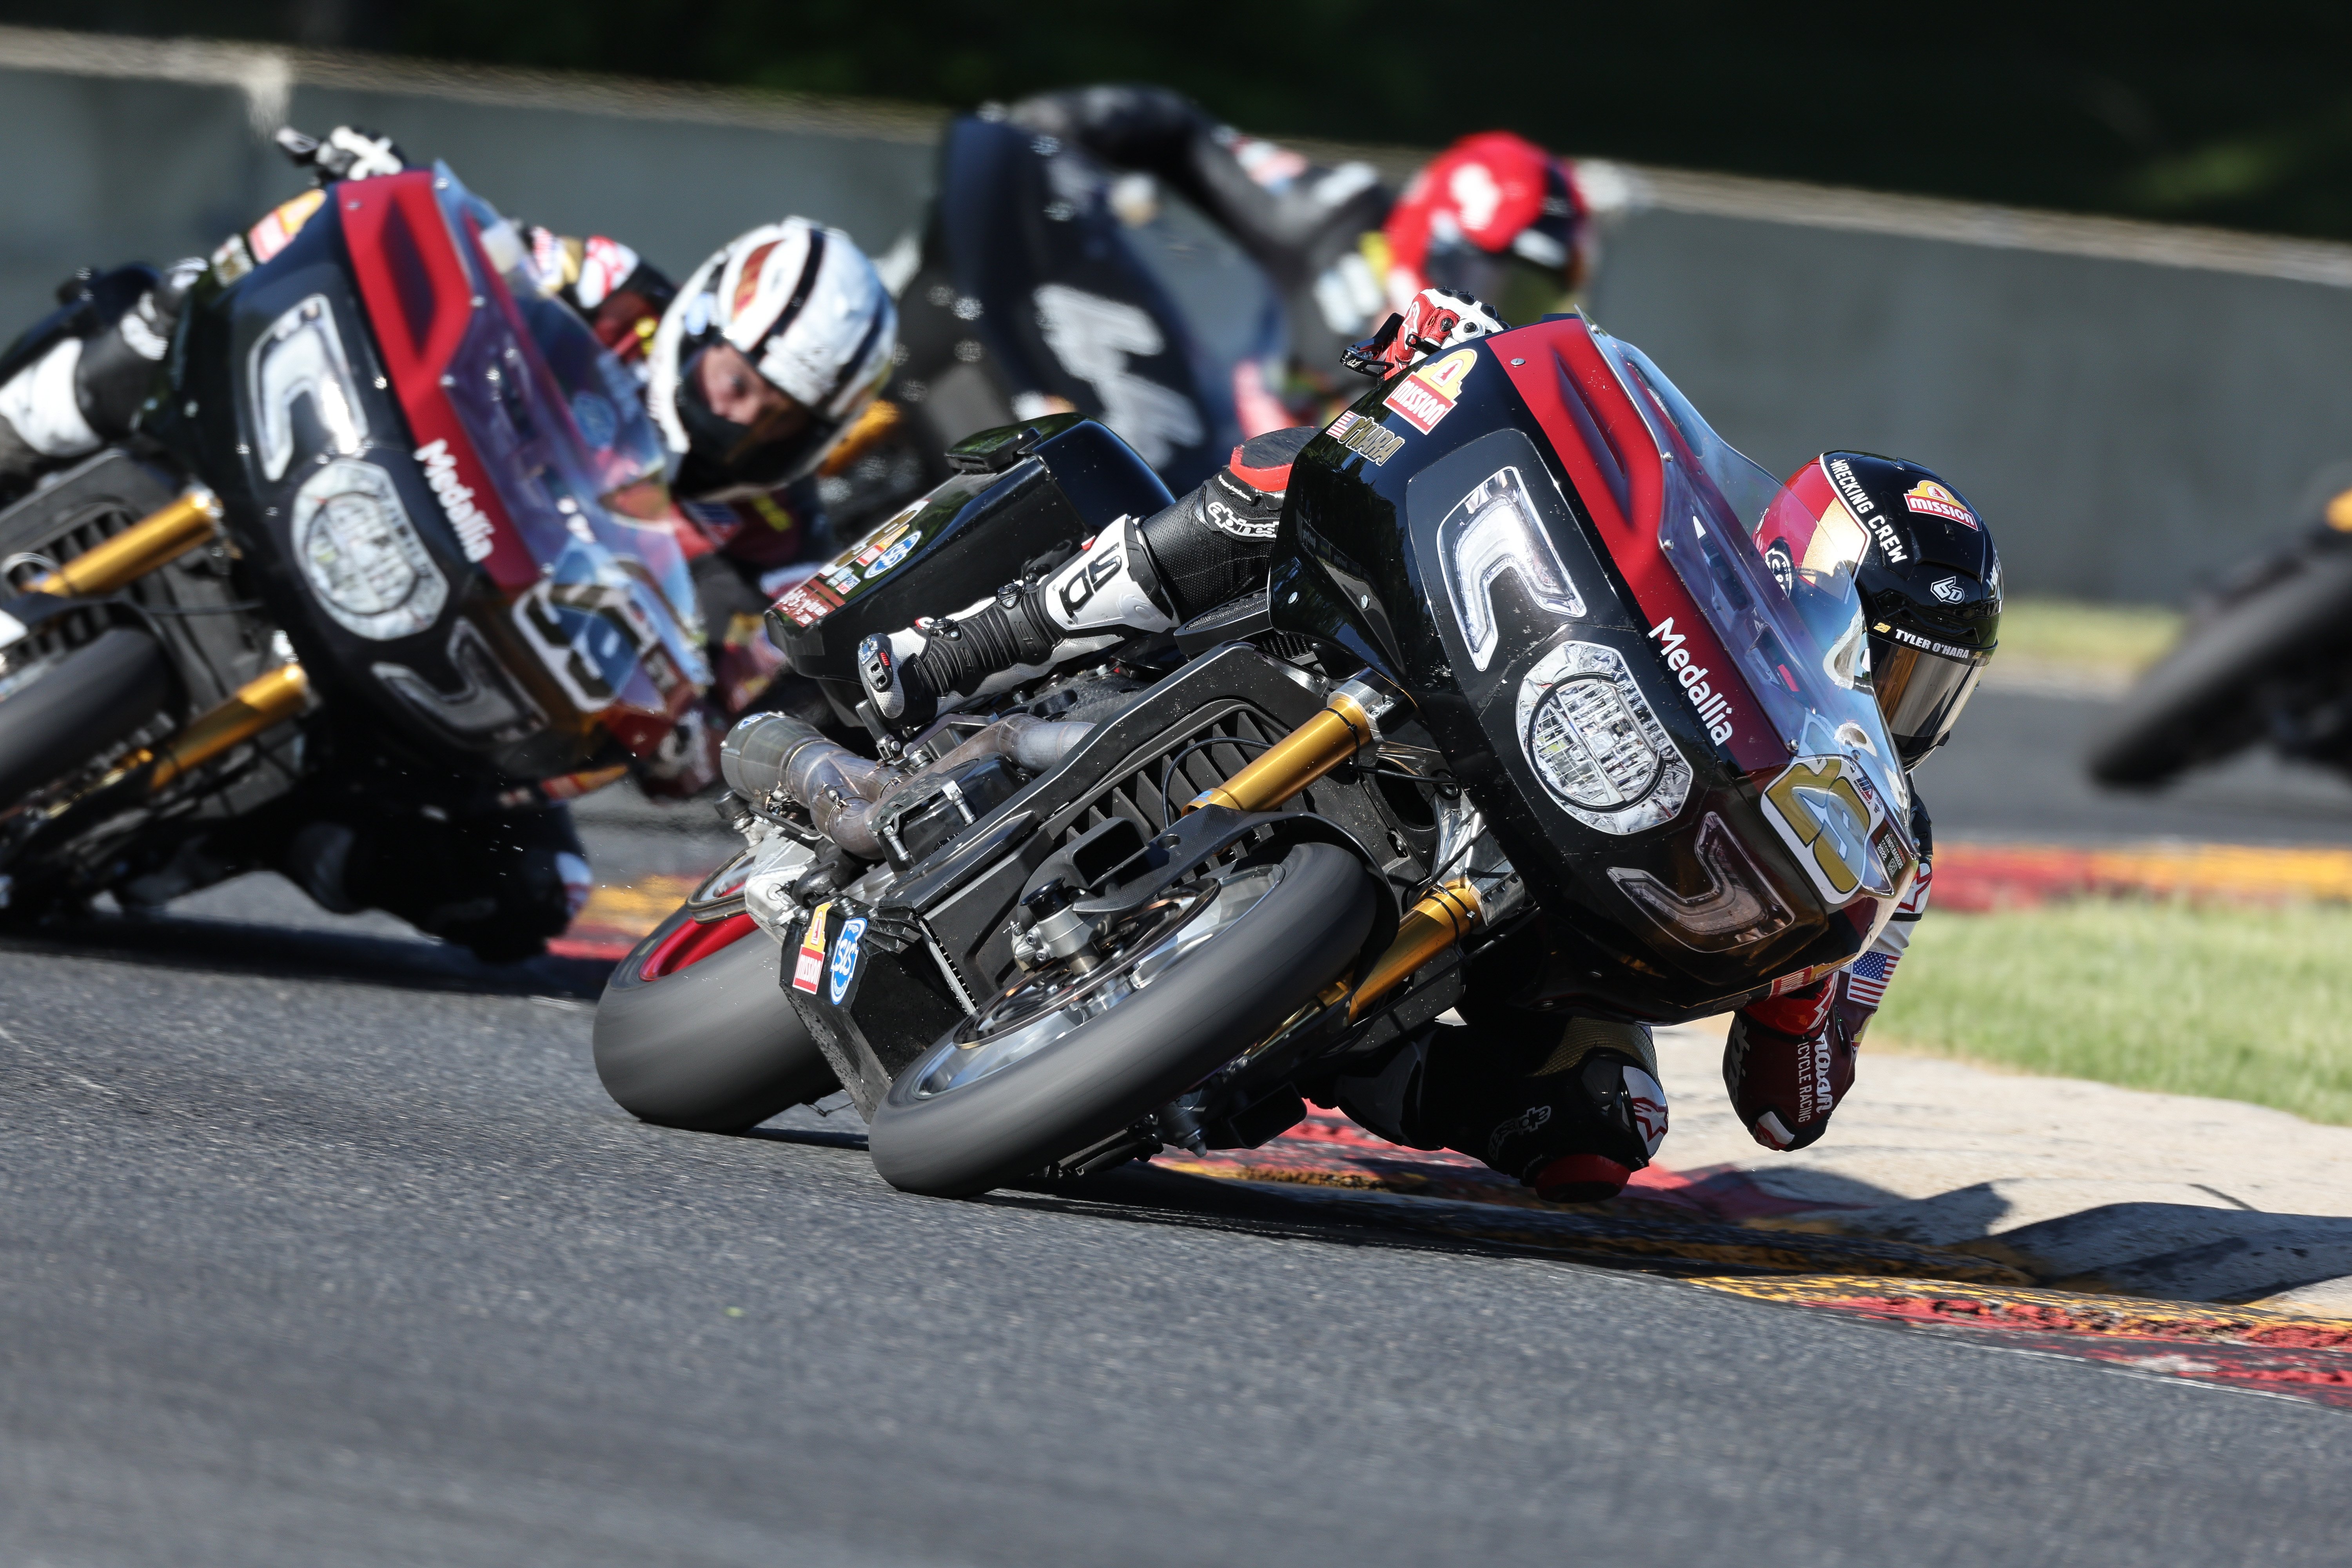 King of the Baggers returns to Road America for 2022